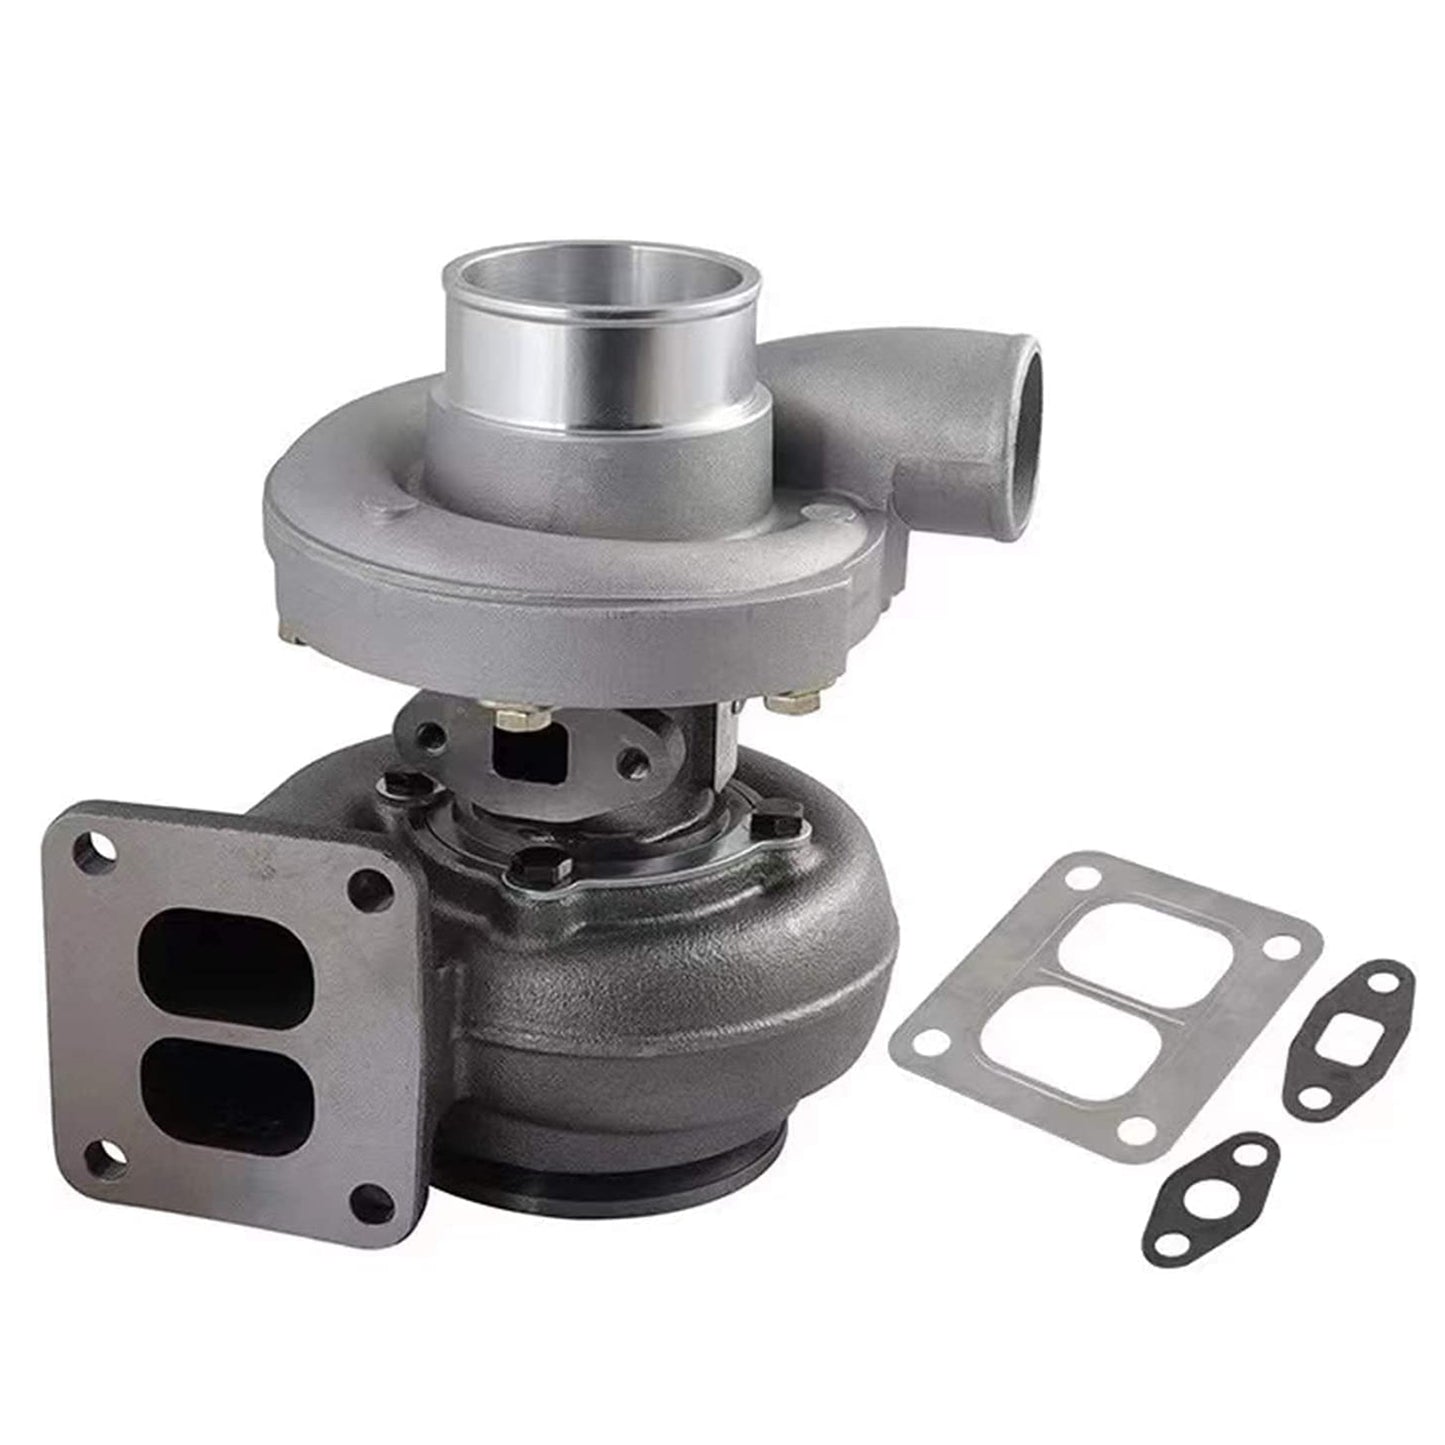 RE508971 Turbocharger Compatible with John Deere 200CLC 230LC 270CLC 270LC Engine 4045T